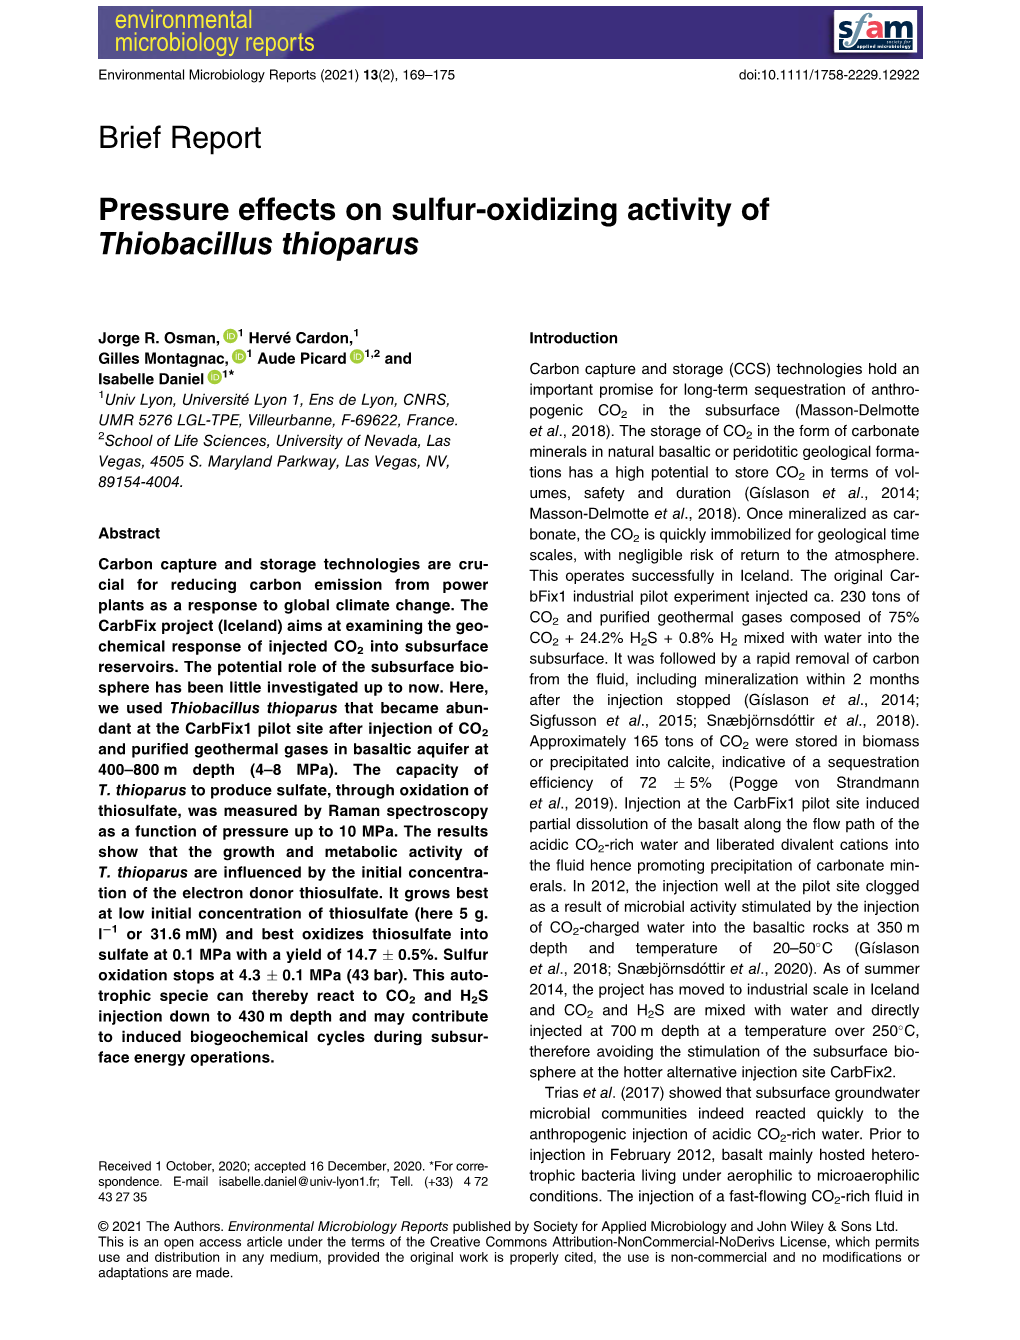 Pressure Effects on Sulfur-Oxidizing Activity of Thiobacillus Thioparus